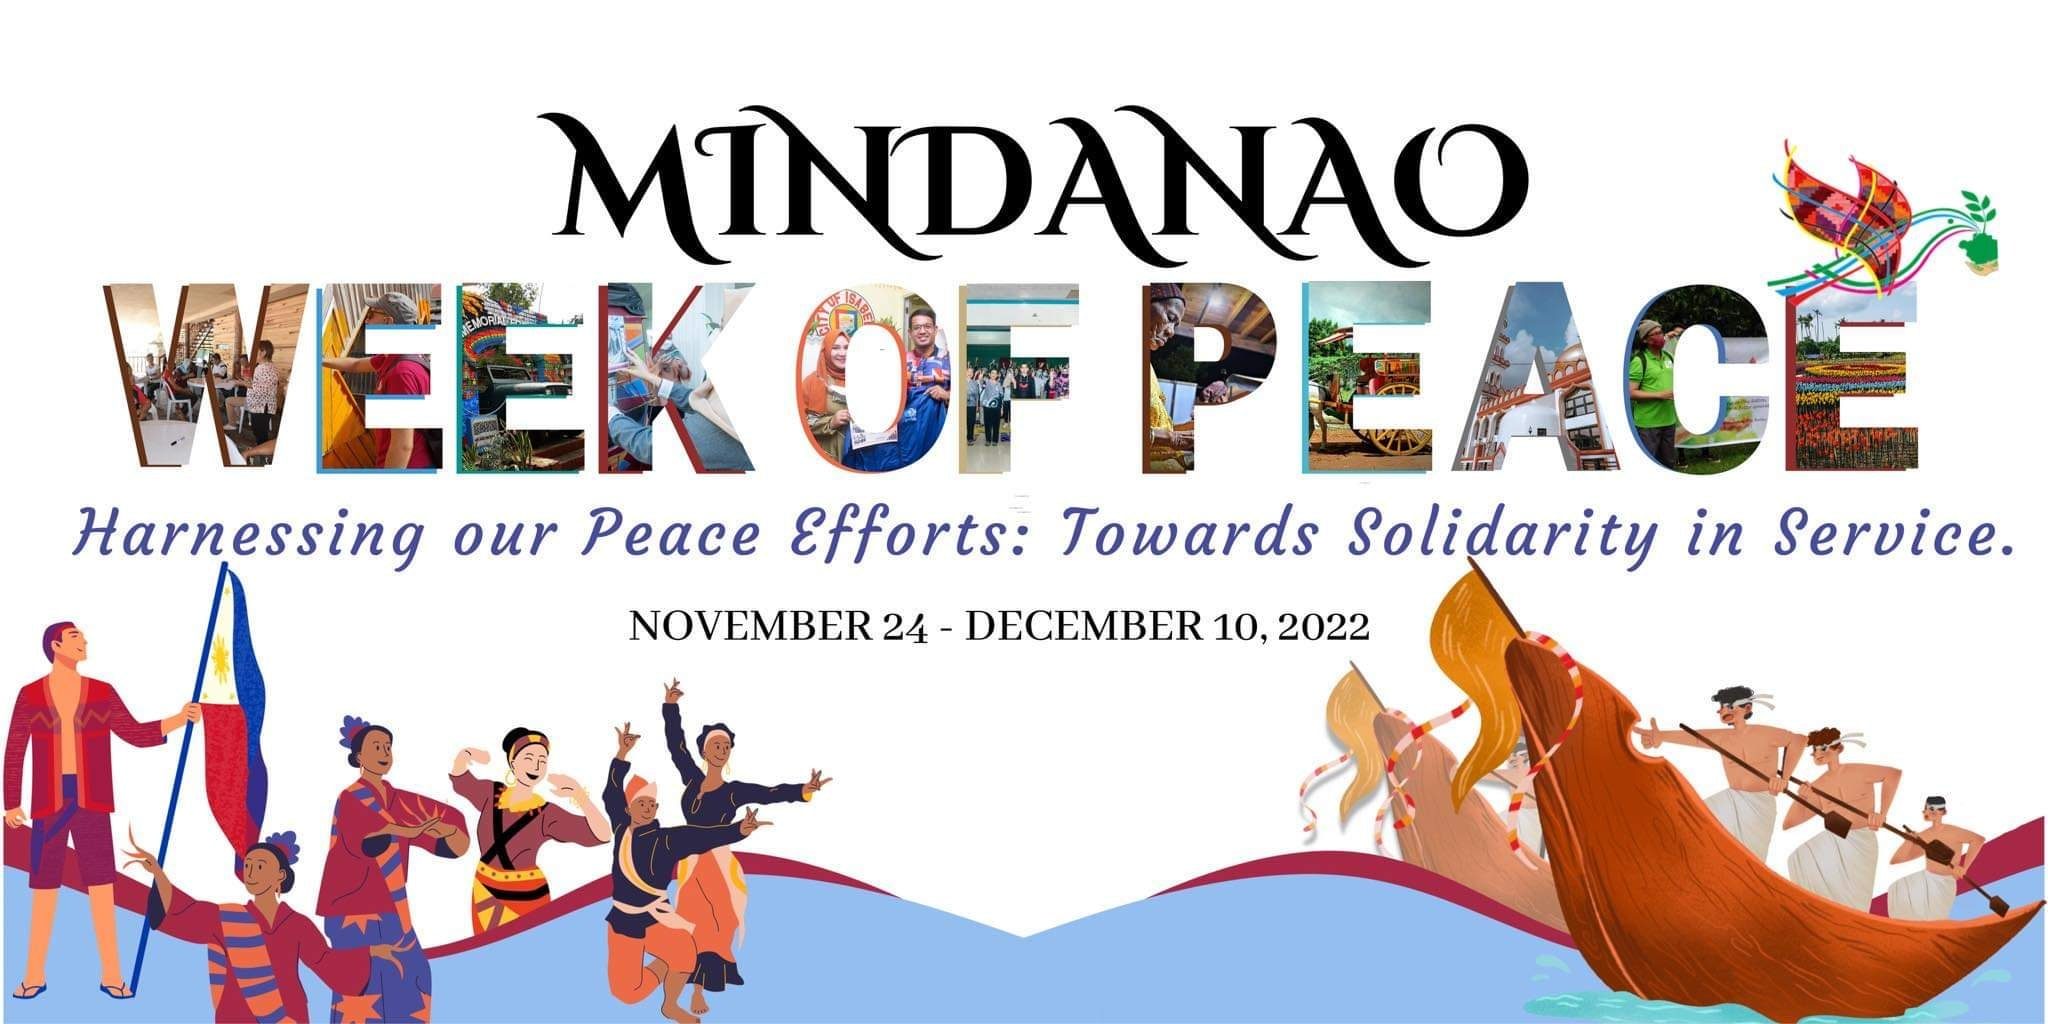 Calls to resume talks with NDF punctuate Mindanao Week of Peace